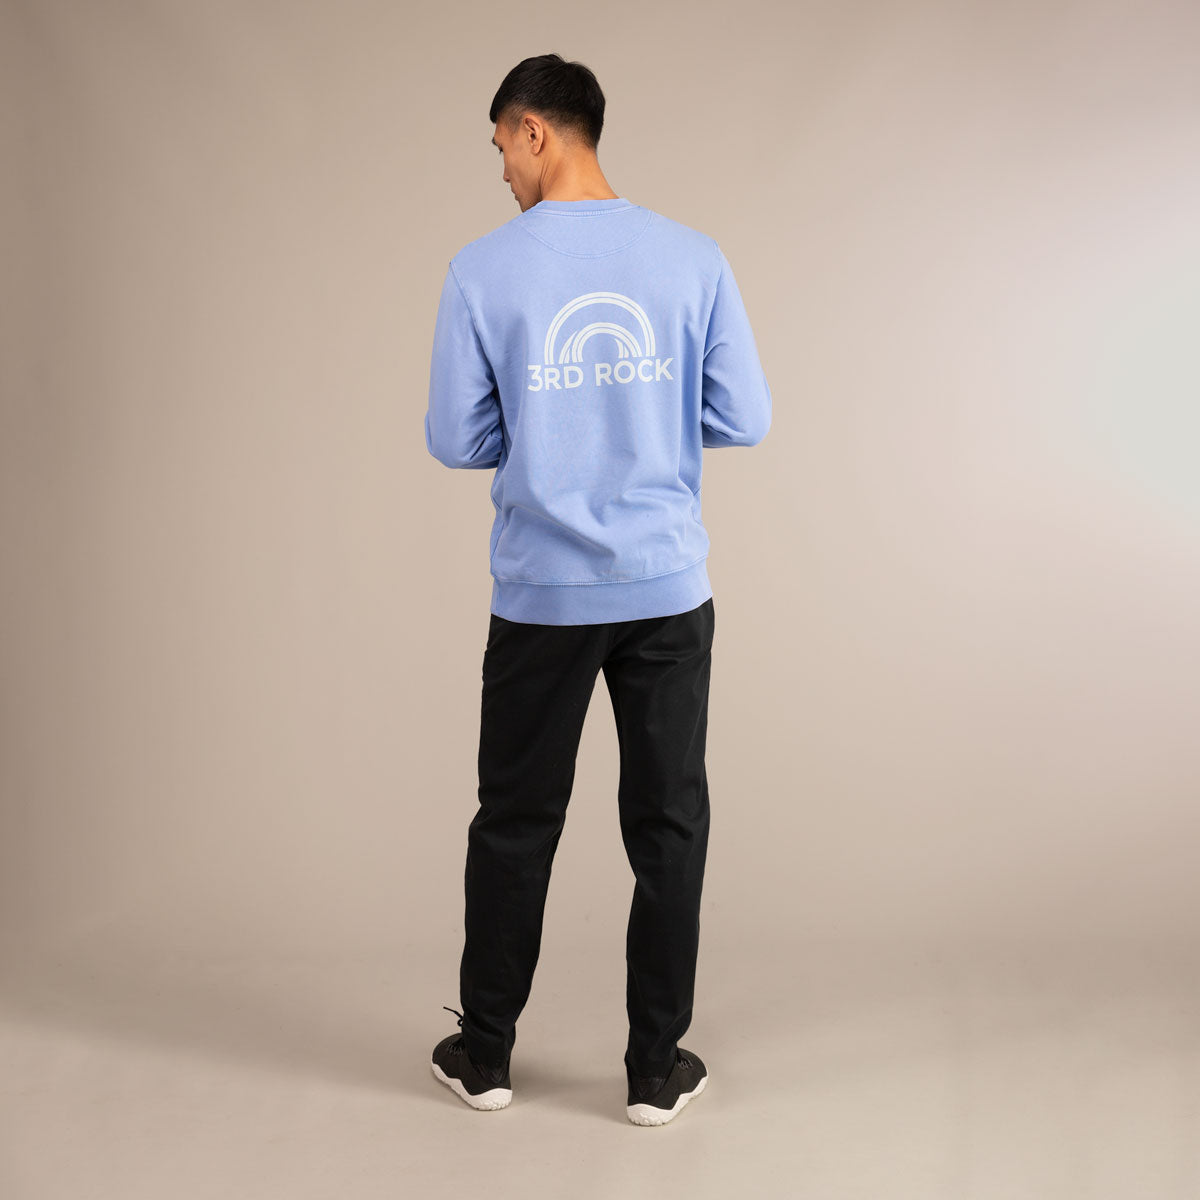 BELLAMY SWEATSHIRT |  Organic Cotton Sweatshirt | 3RD ROCK Clothing -  Donald is 6ft 1 with a 39" chest and wears a size M M